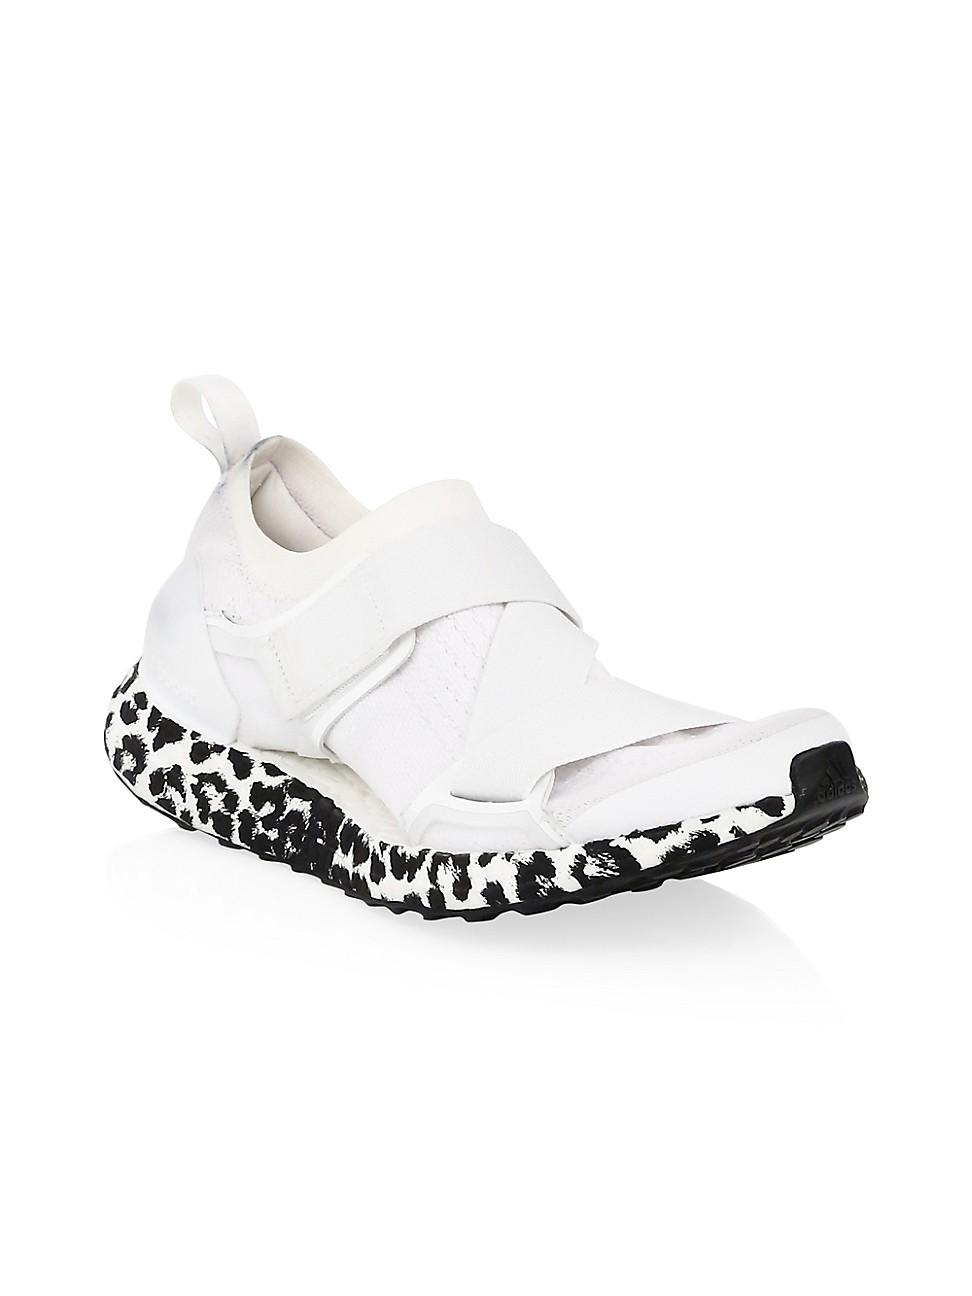 adidas By Stella McCartney Cotton Ultraboost X Low-top Trainers in Cloud  White (White) - Save 50% - Lyst